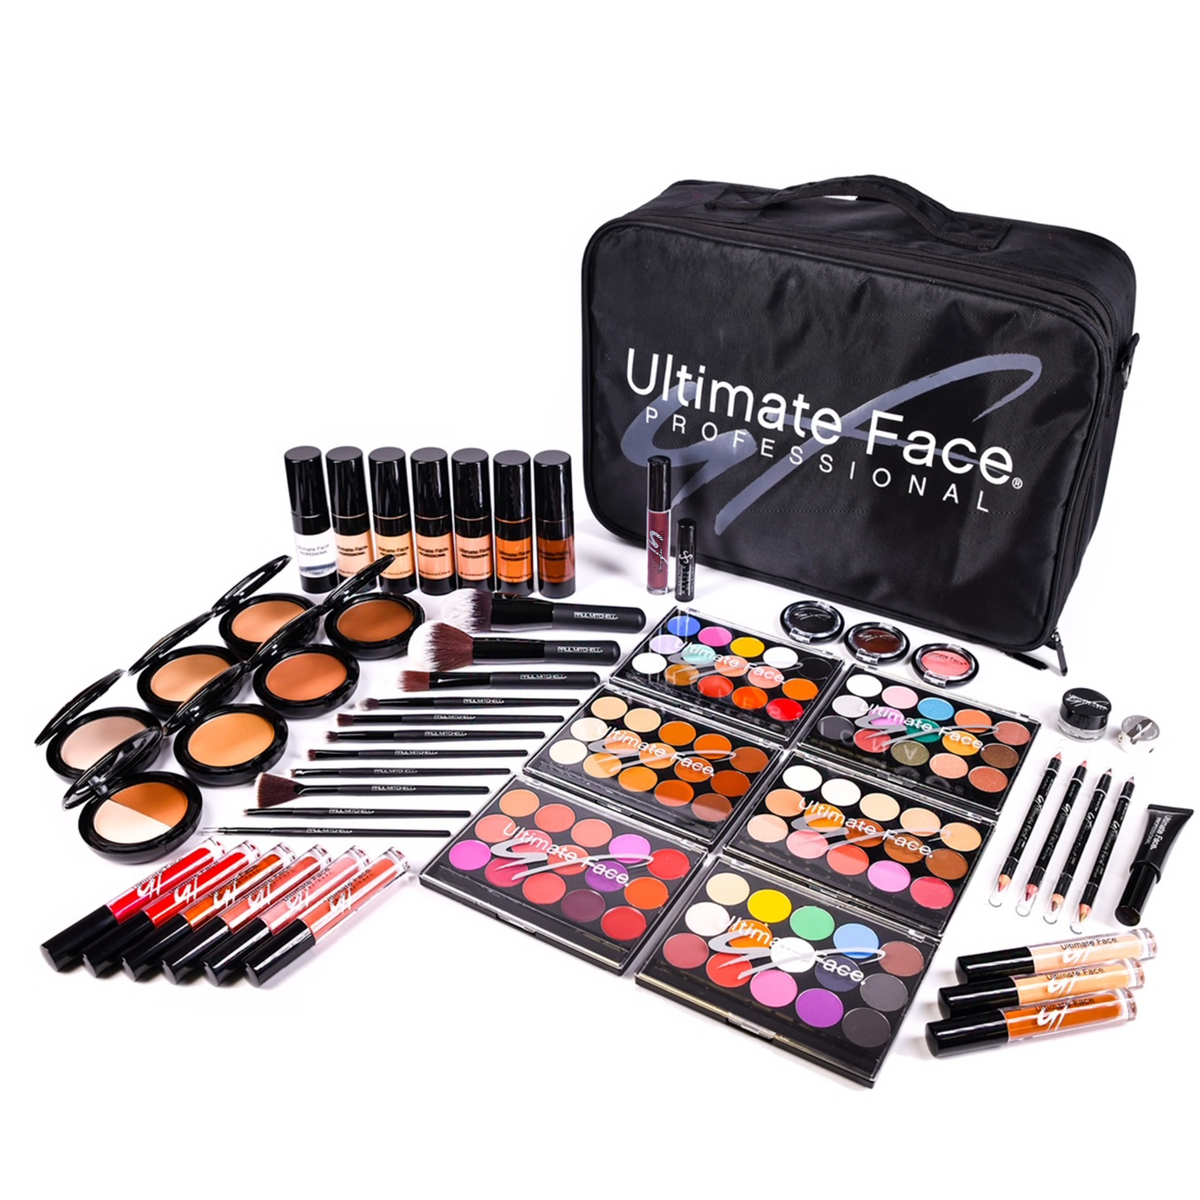 Ultimate Face® Masters Makeup Kit